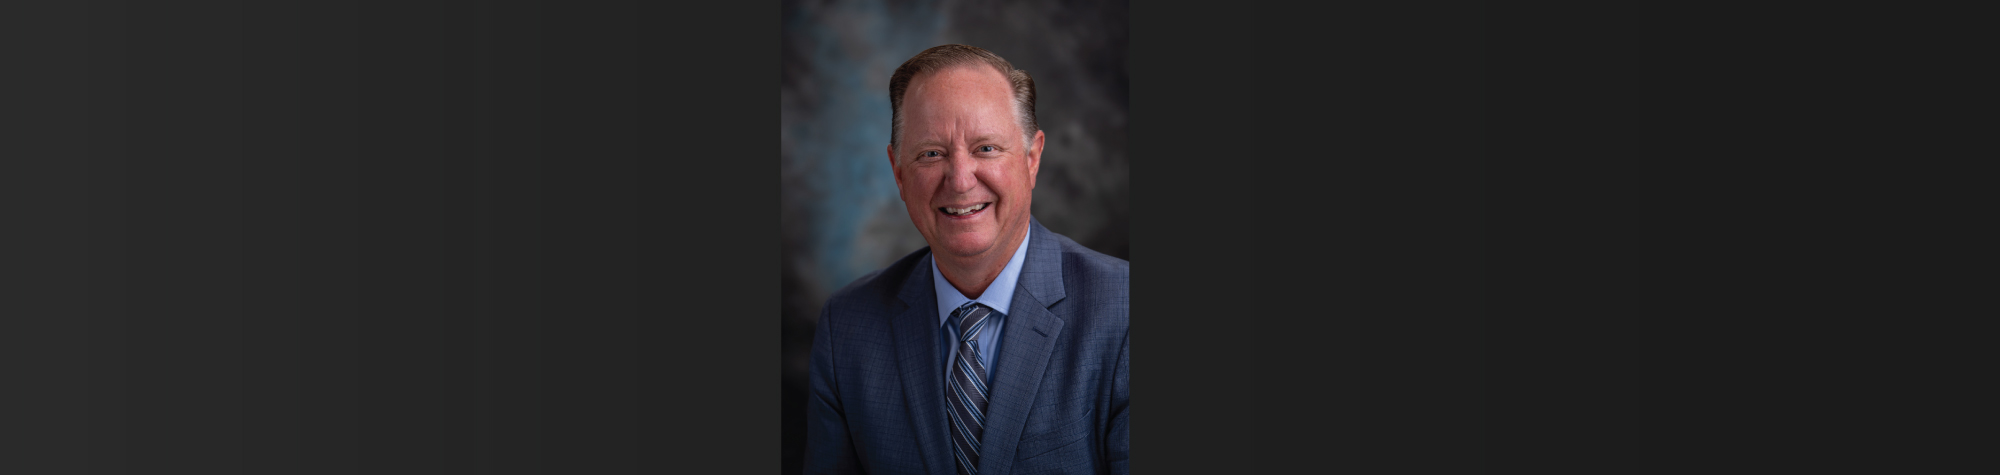 Merchants Insurance Group Appoints President Charles E. Makey, III, As President and Chief Executive Officer